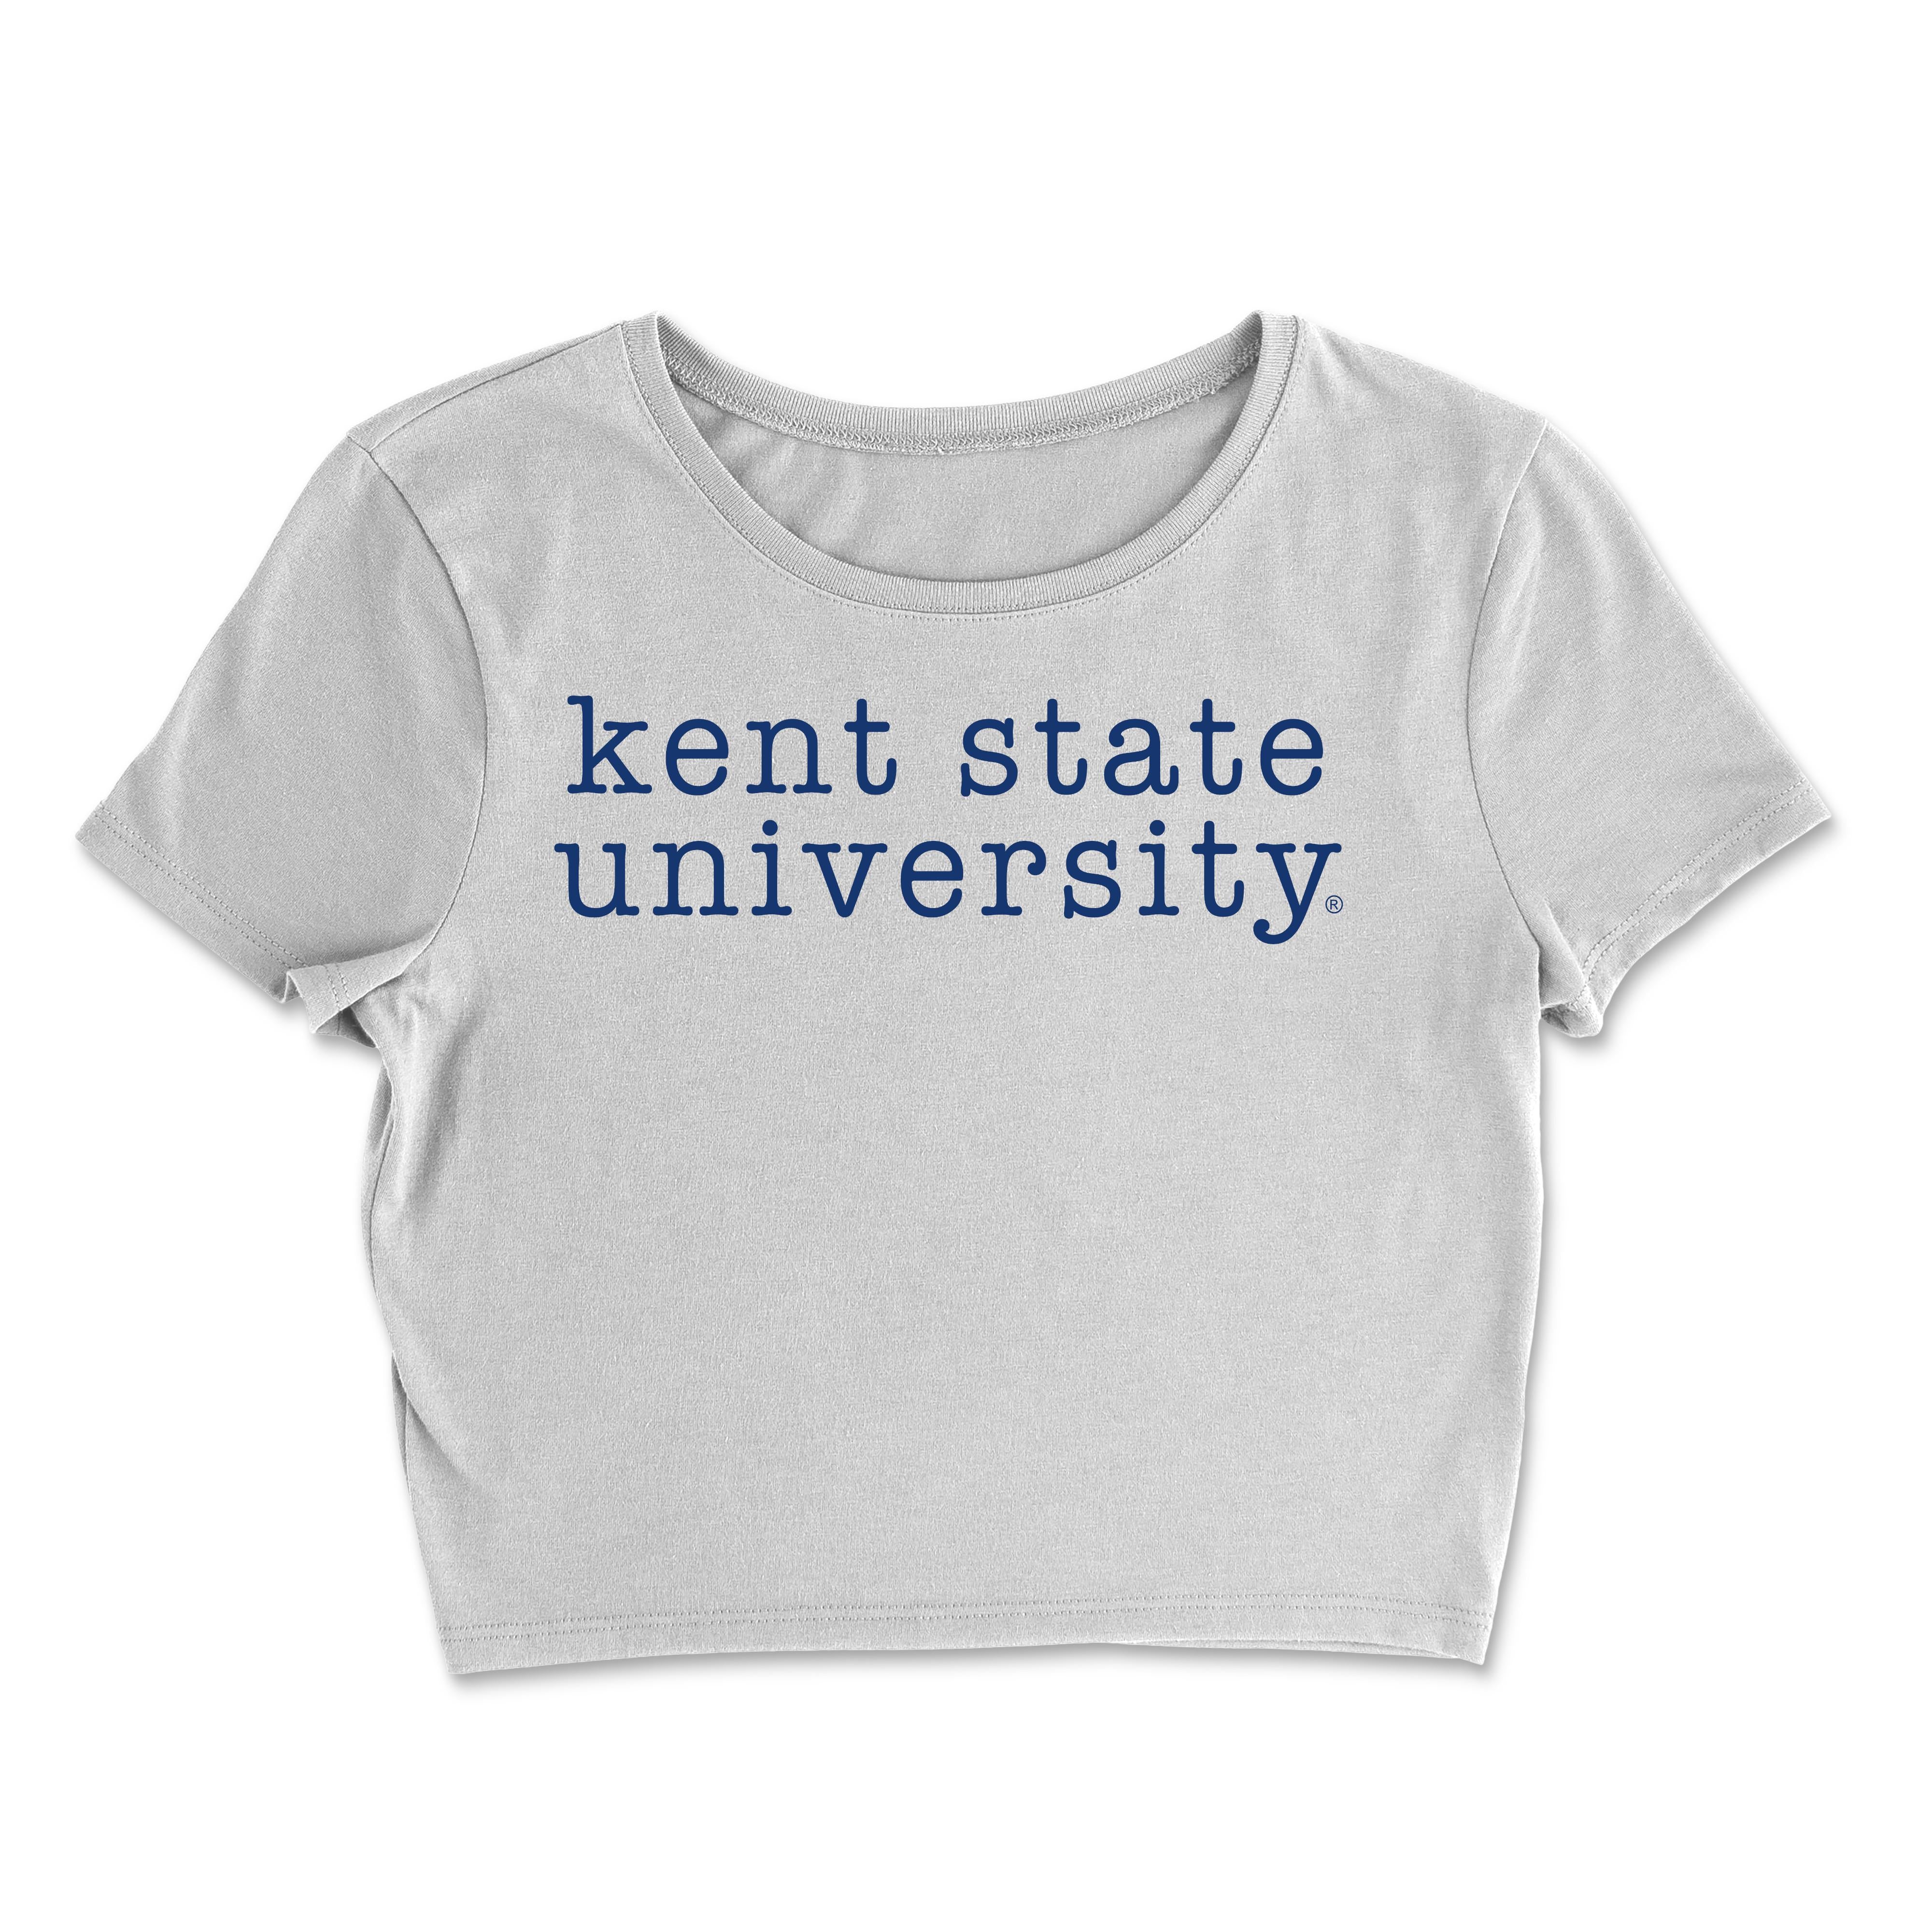 Kent State University Thin Letters Crop Top